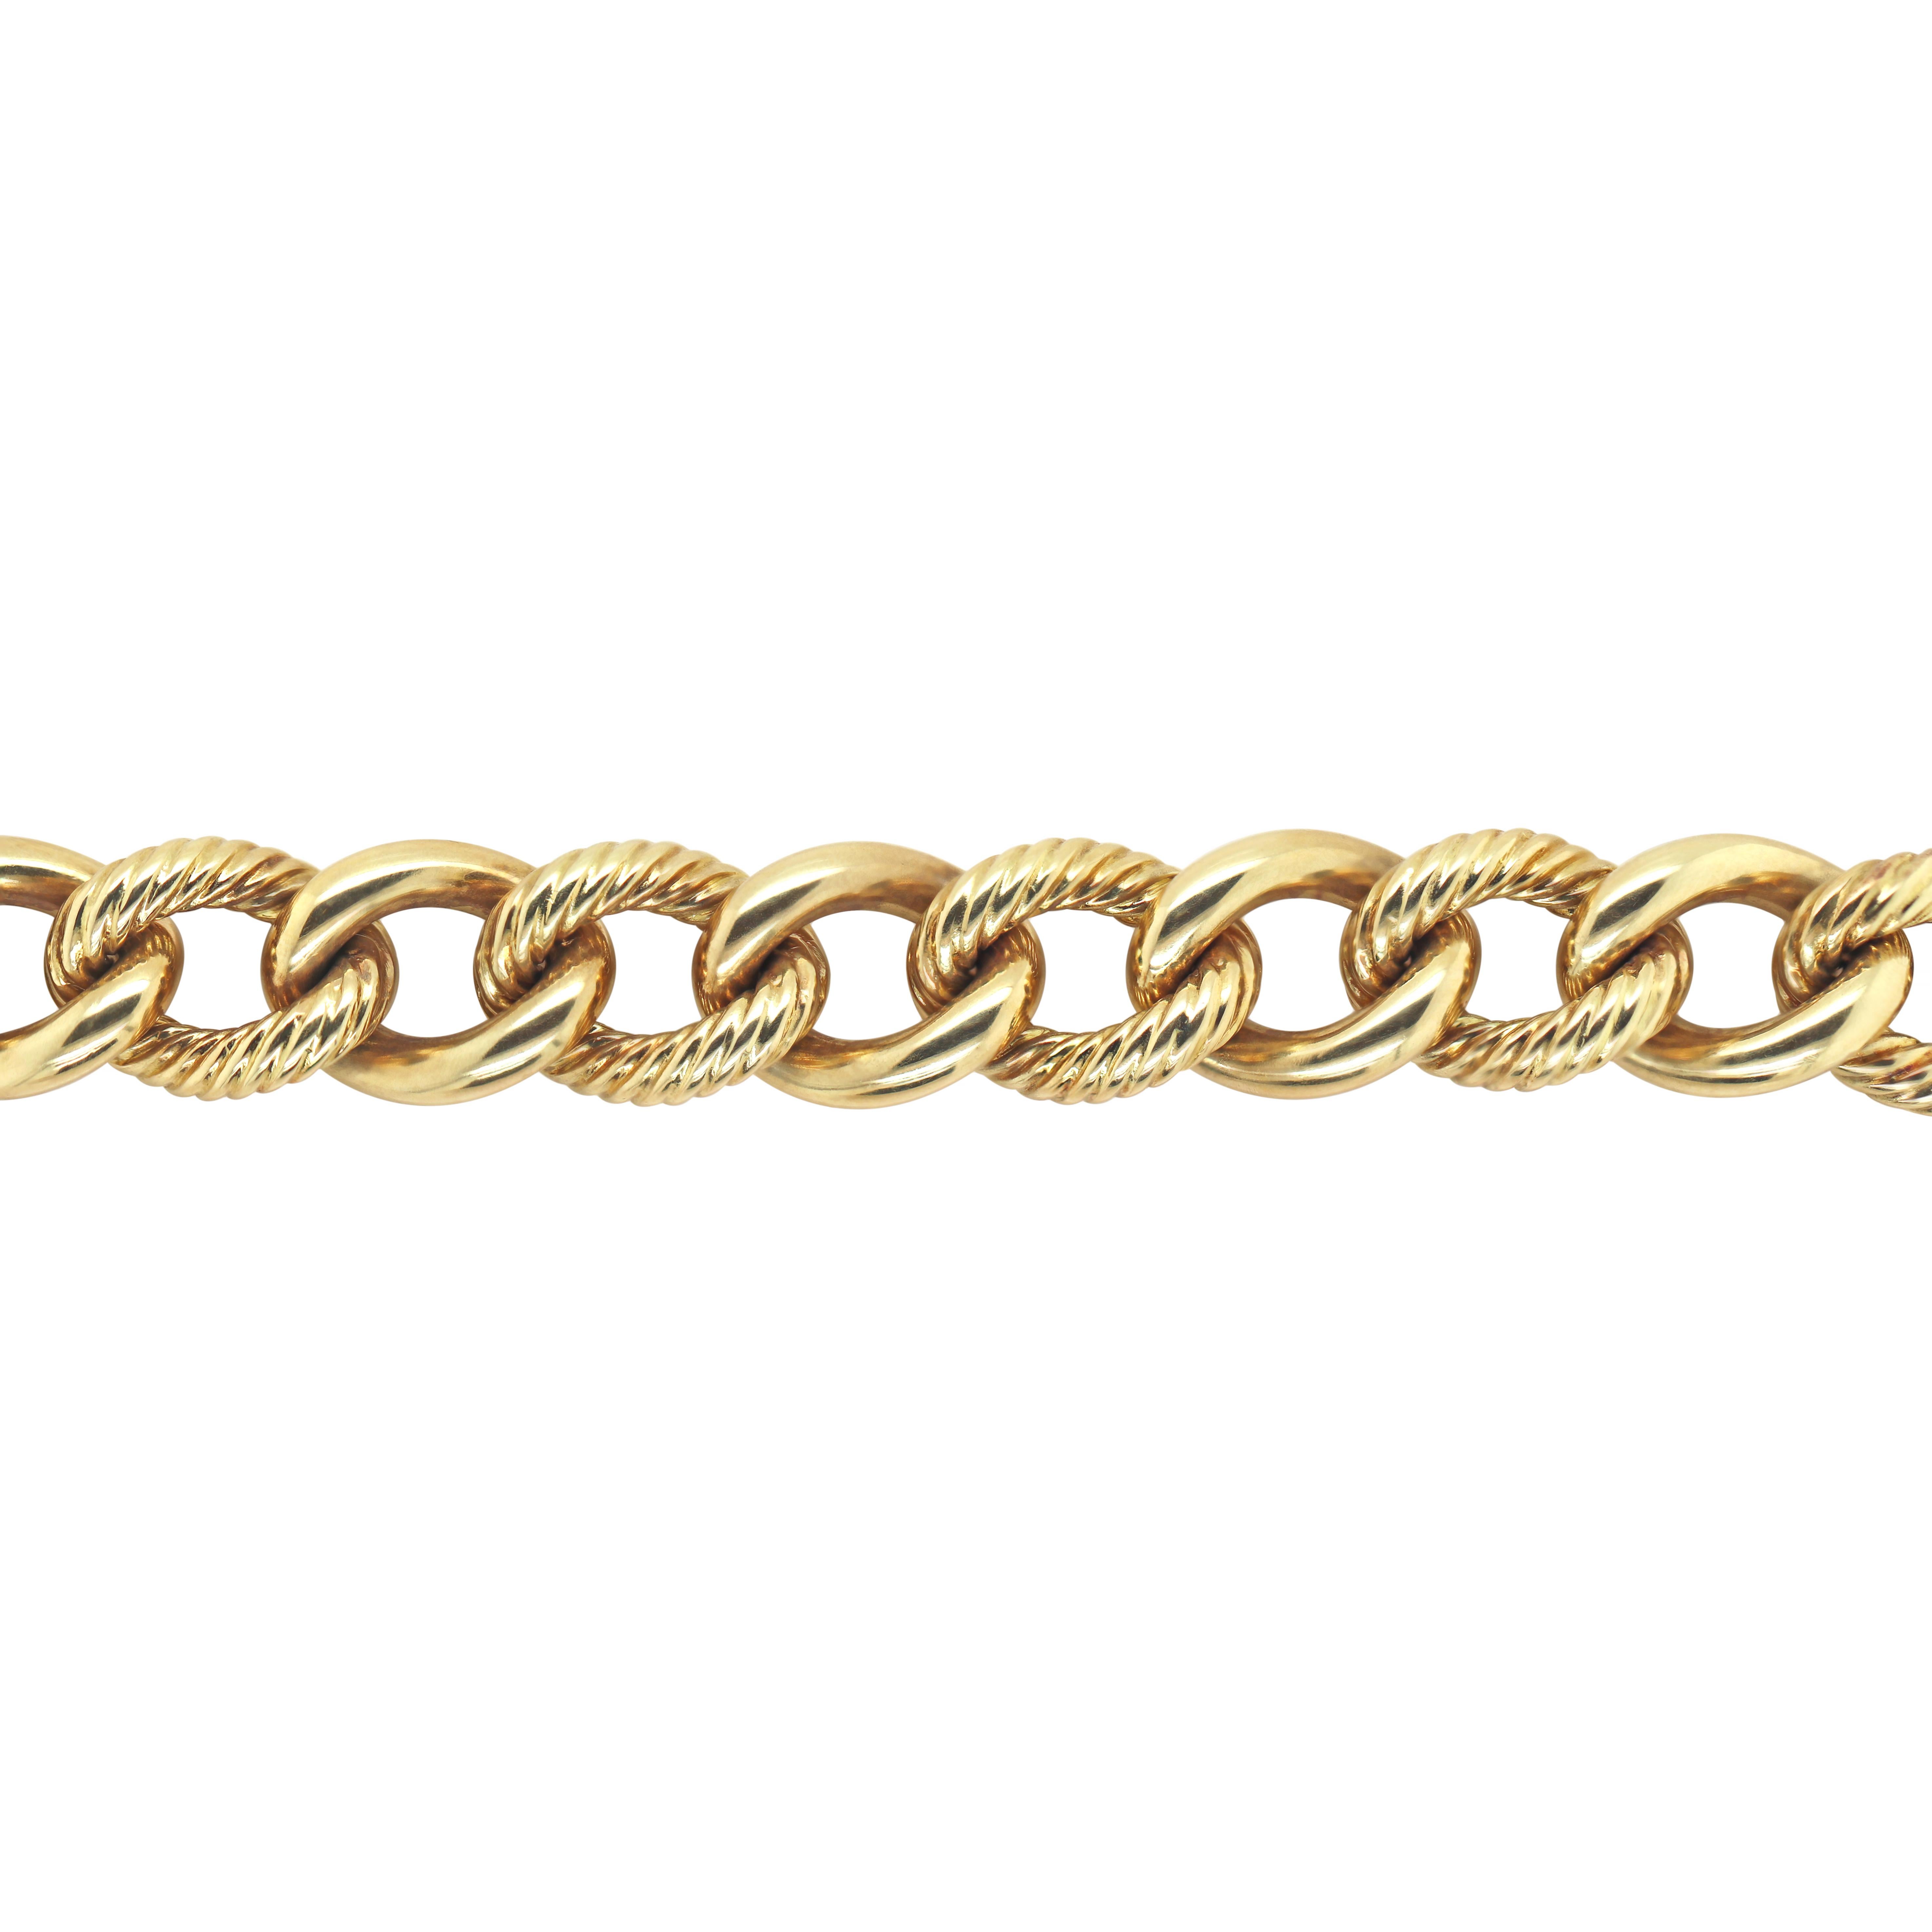 This beautiful curb link bracelet by David Yurman is crafted in 18 carat yellow gold and features alternating high-polish and cable textured large curb links. The bracelet is finished with a hidden link clasp and measures 8 inches in length and